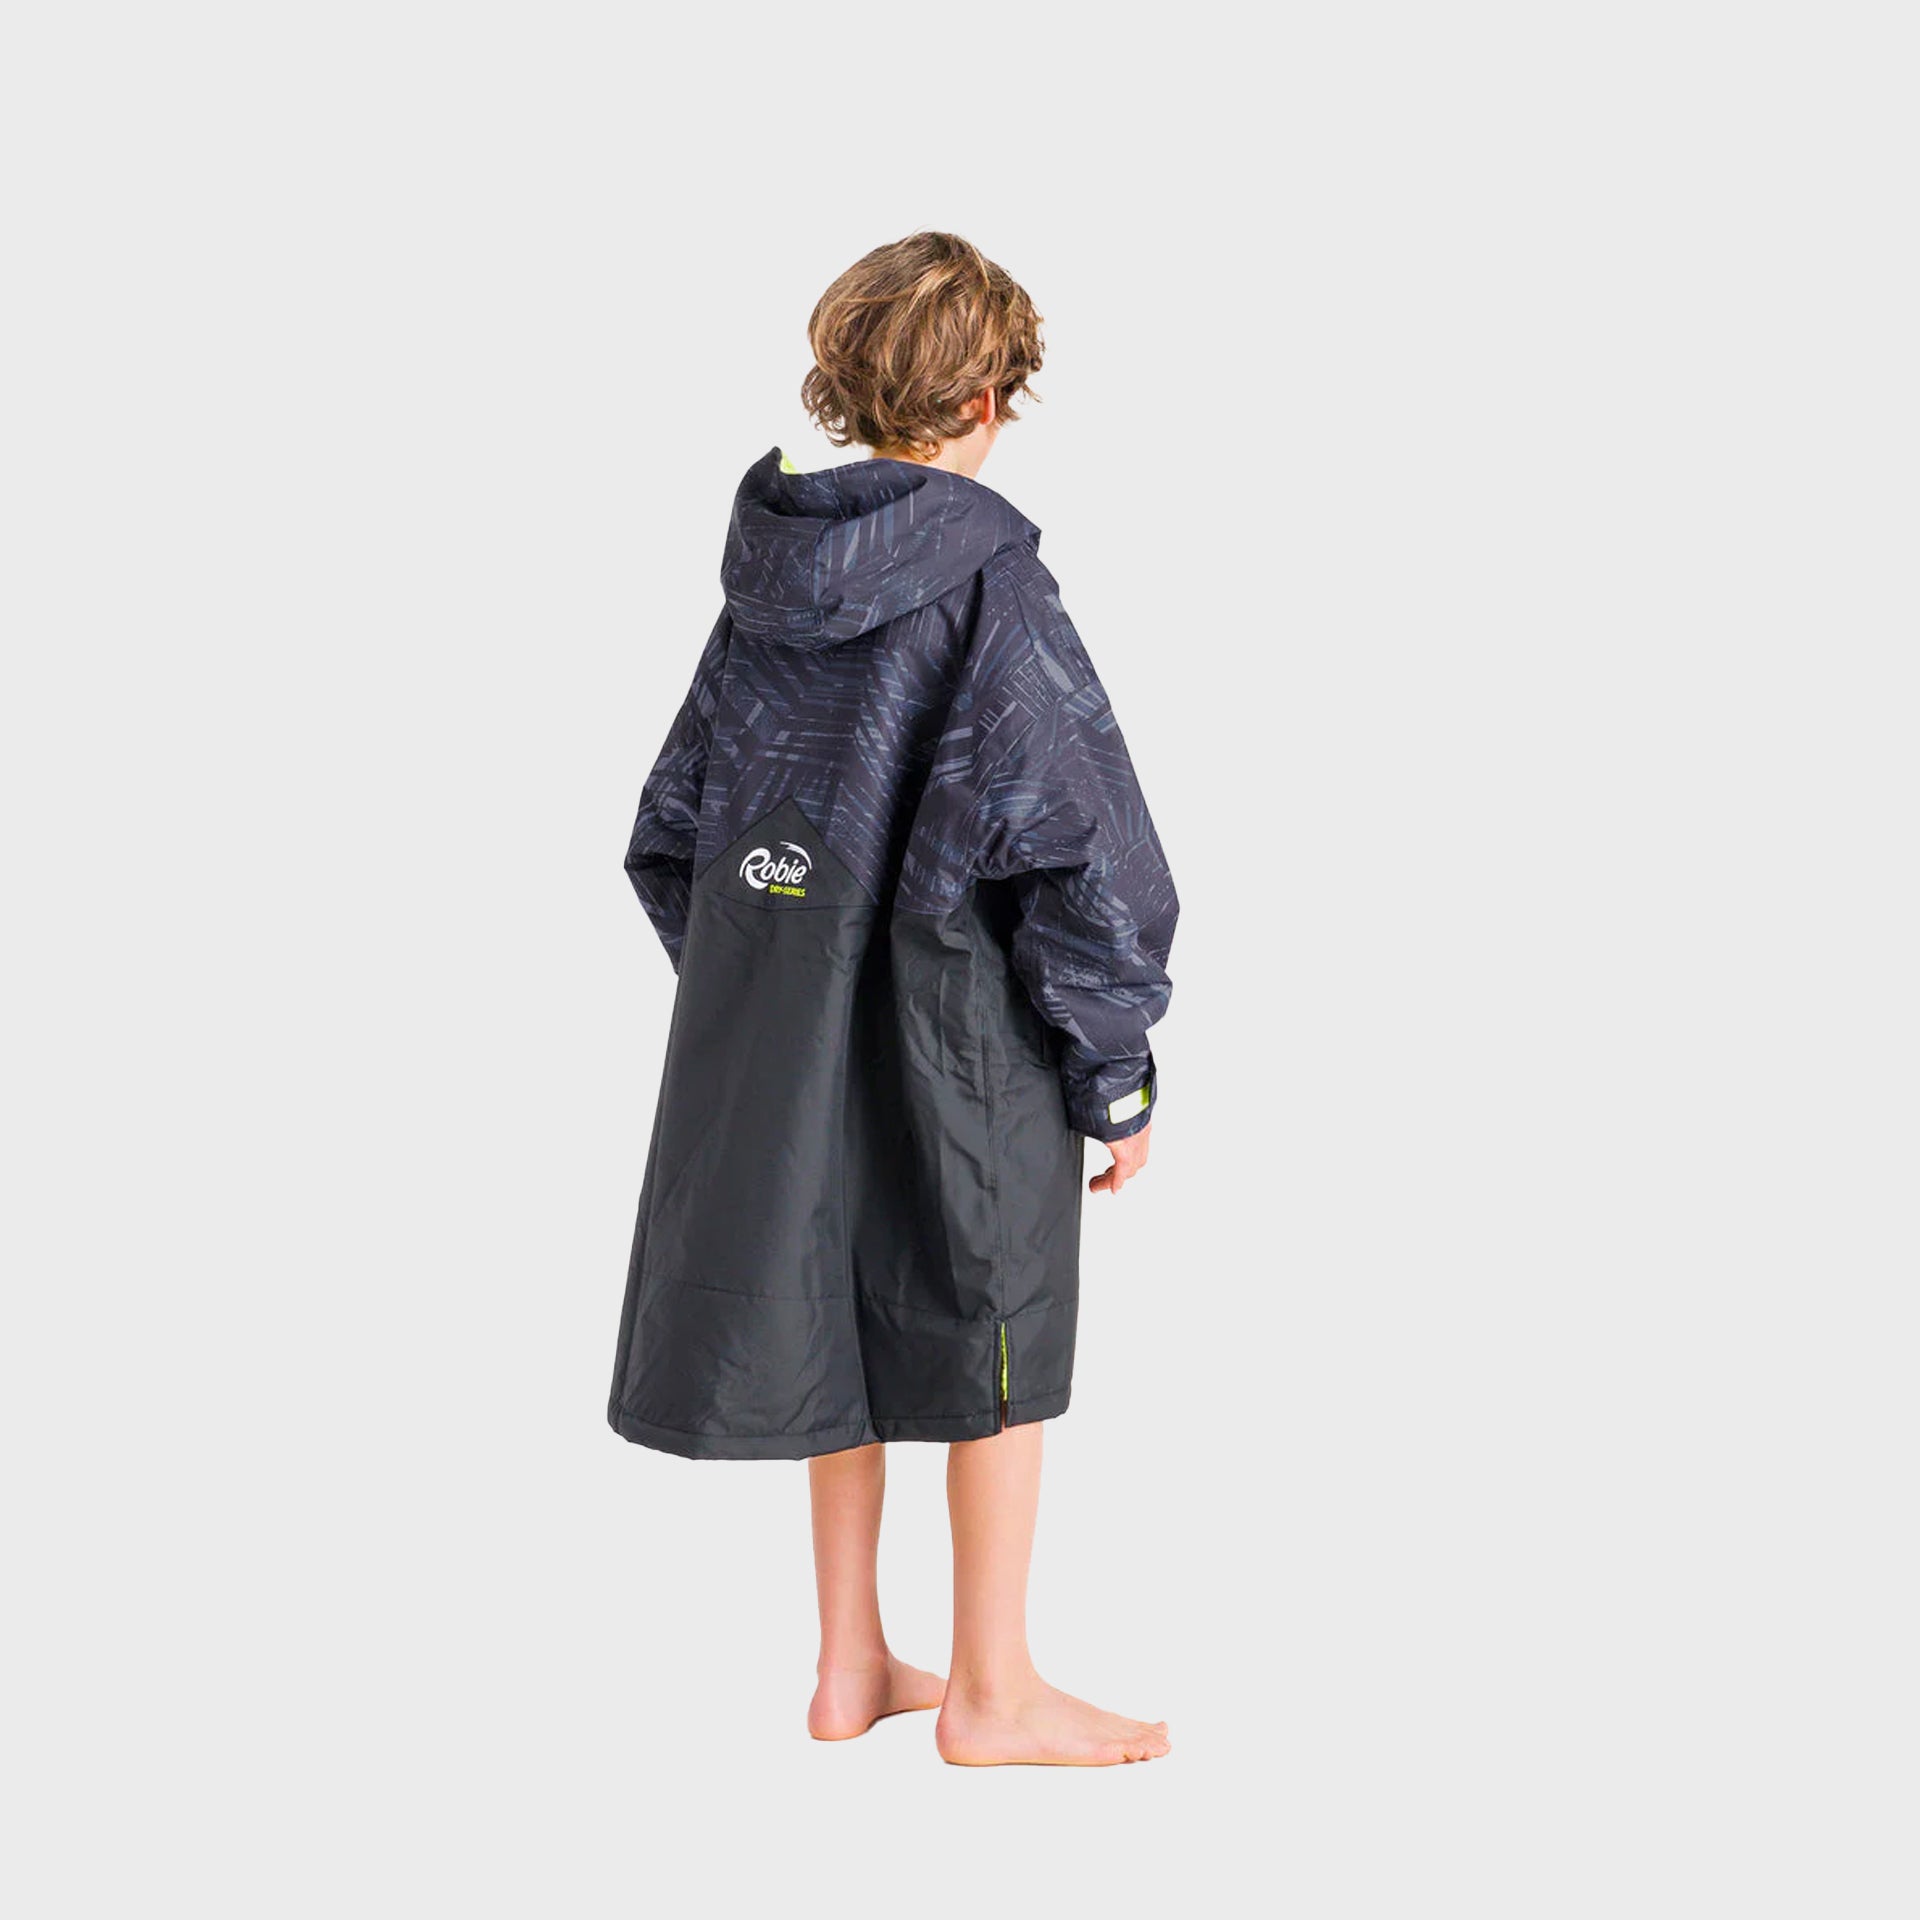 Robie Dry-Series Recycled Long Sleeve Junior Changing Robe - Black/Black Shade/Lime - ManGo Surfing